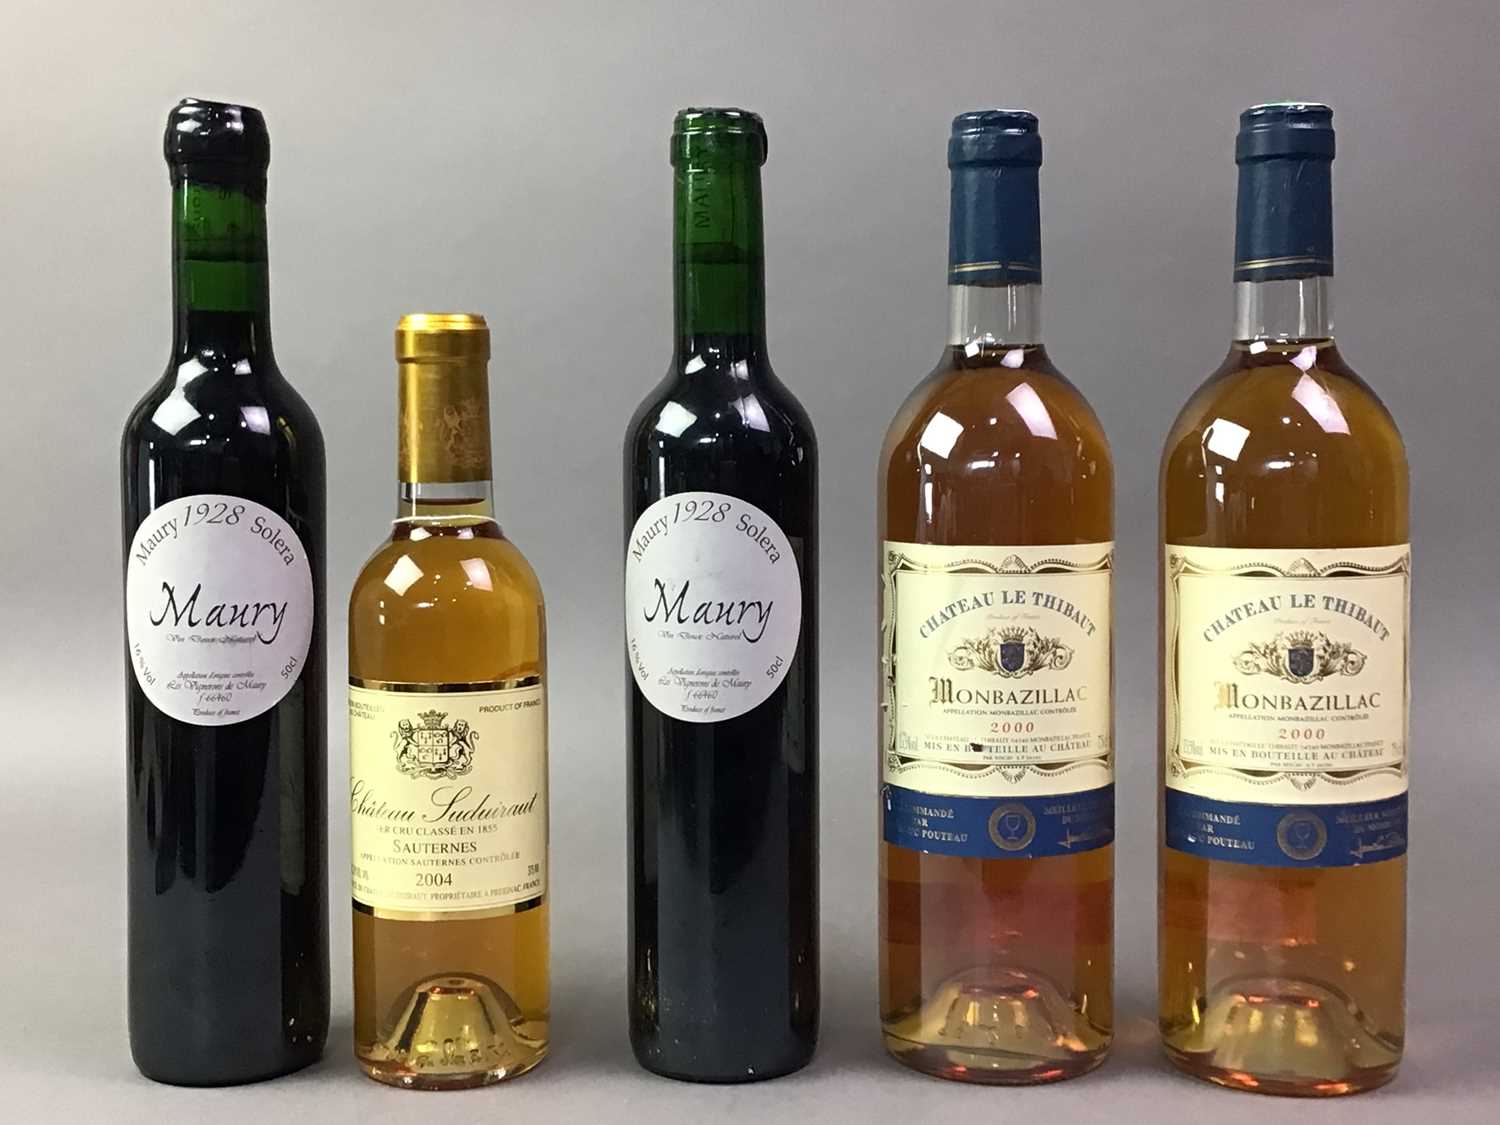 COLLECTION OF FRENCH FORTIFIED WINE AND DESSERT WINE INCLUDING CHATEAU SUDUIRAUT 2004 SAUTERNES - Image 2 of 2